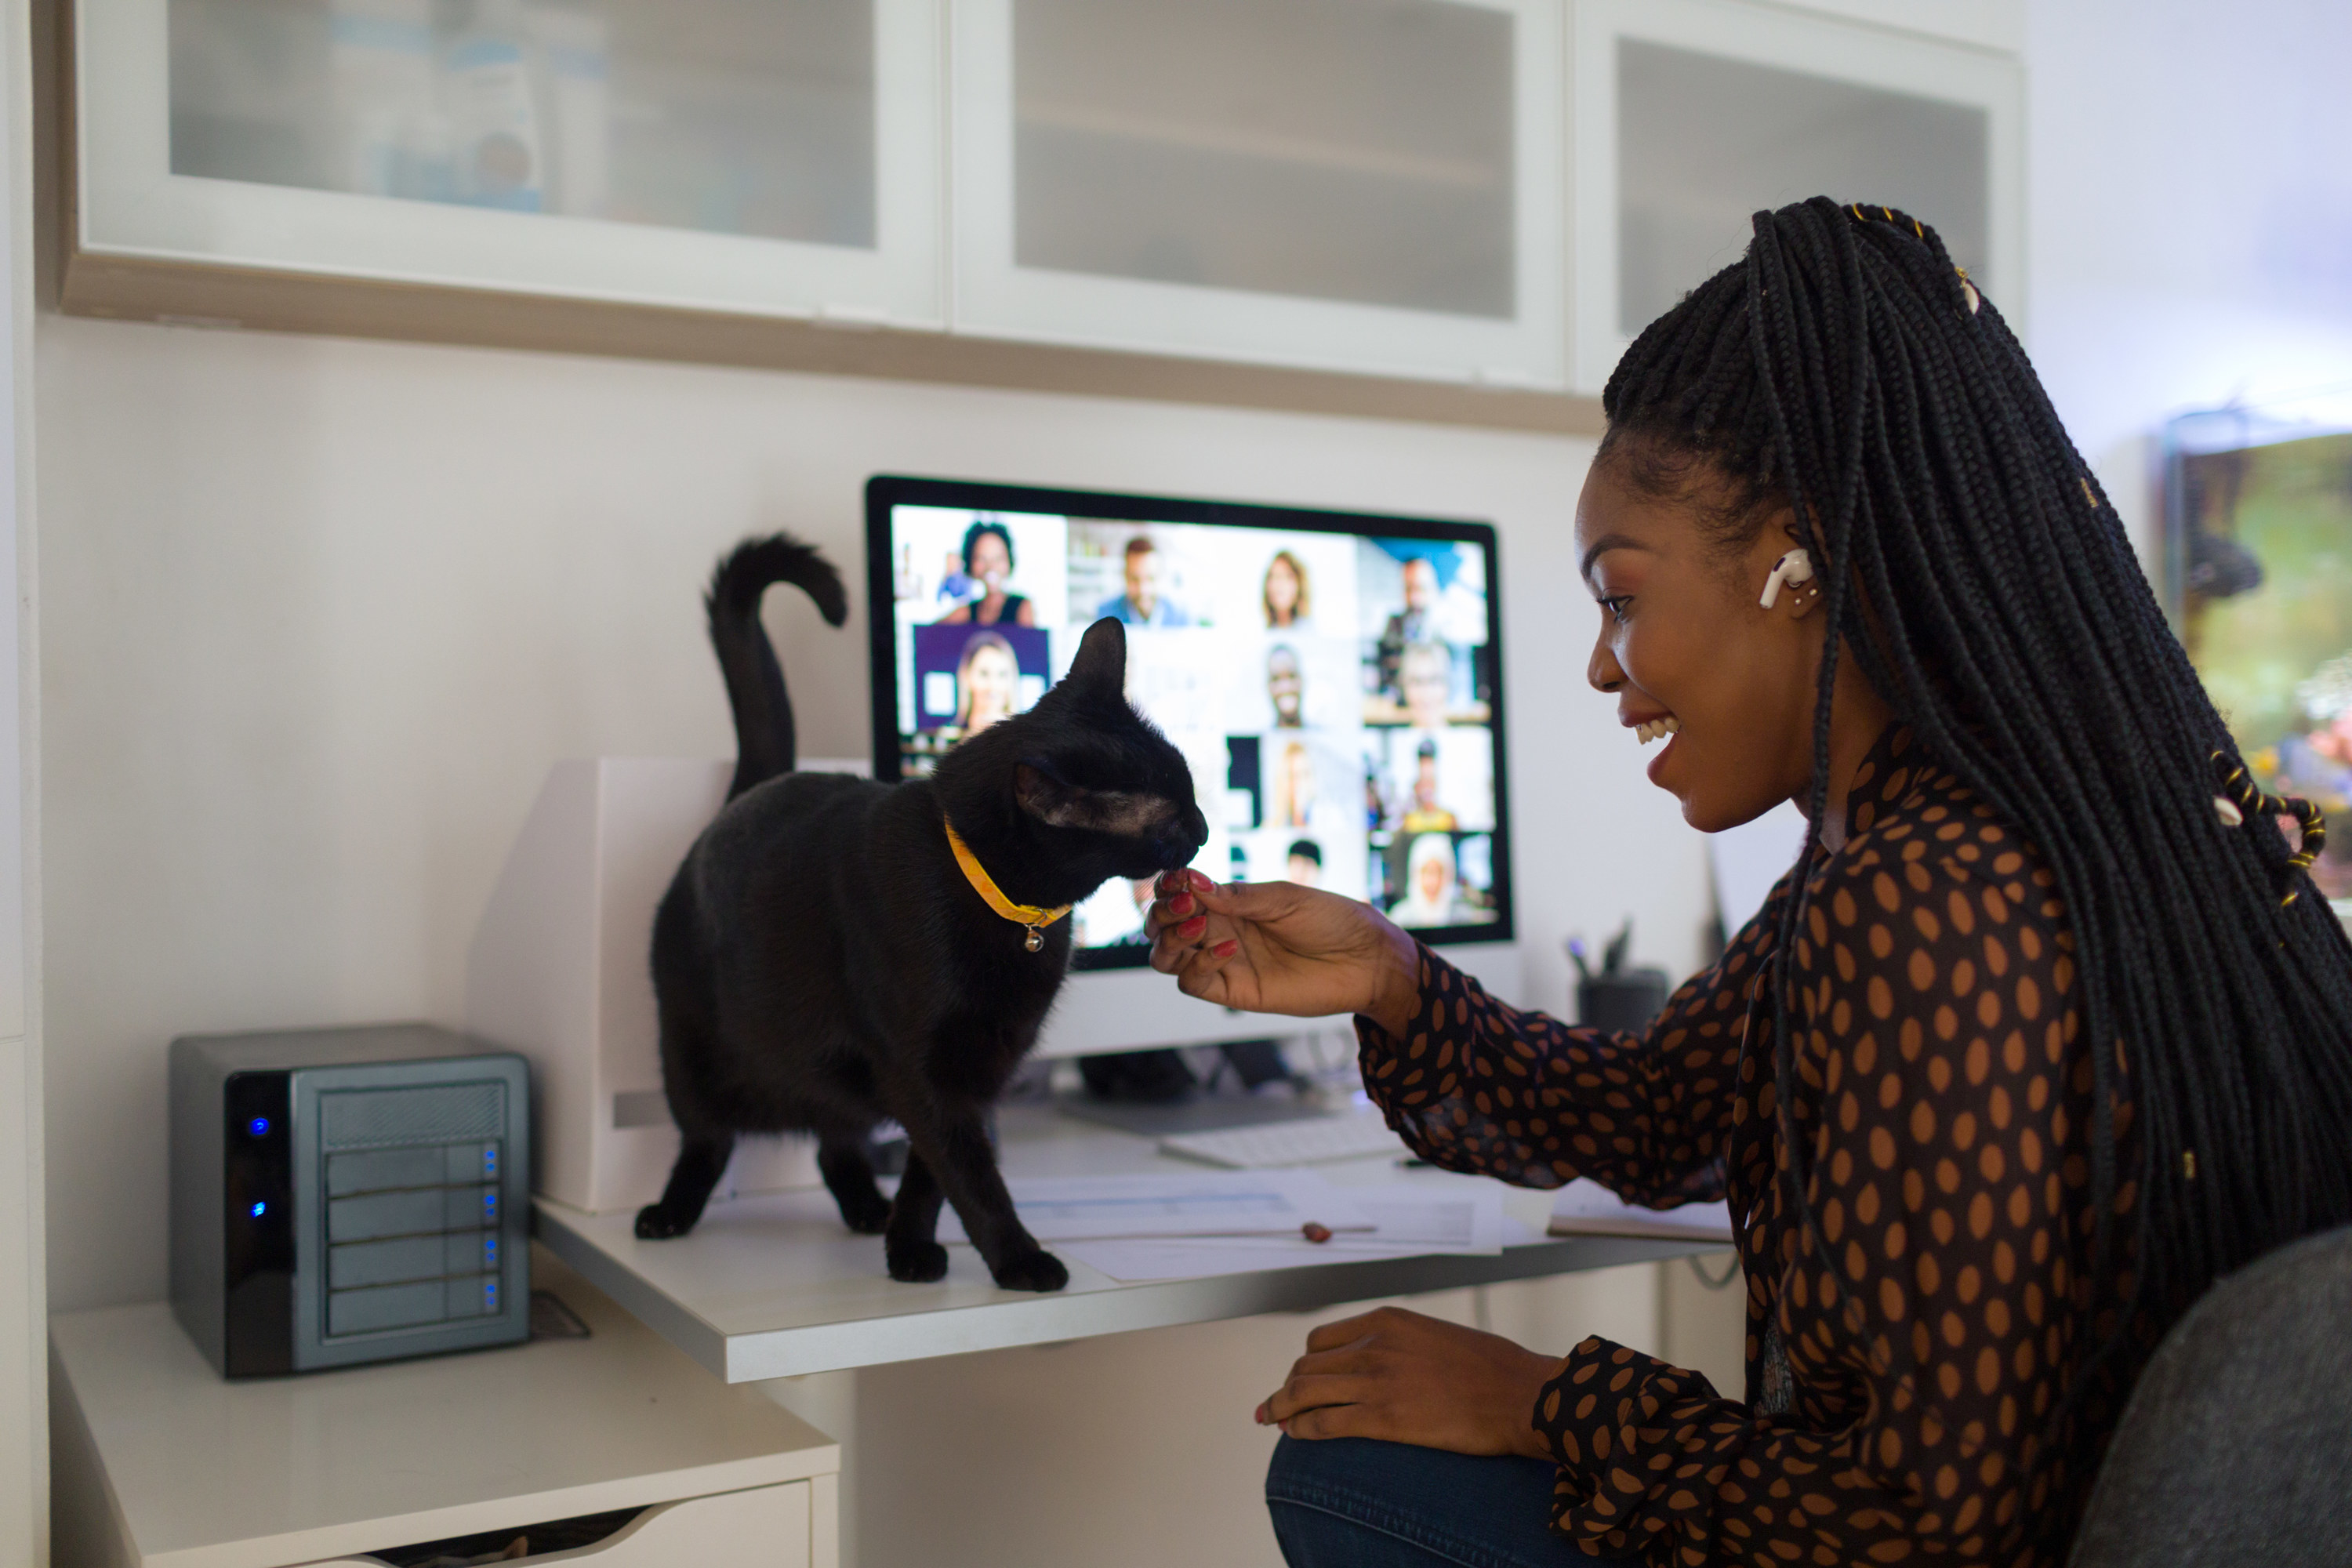 Woman working from home showing off her cat to coworkers on Zoom